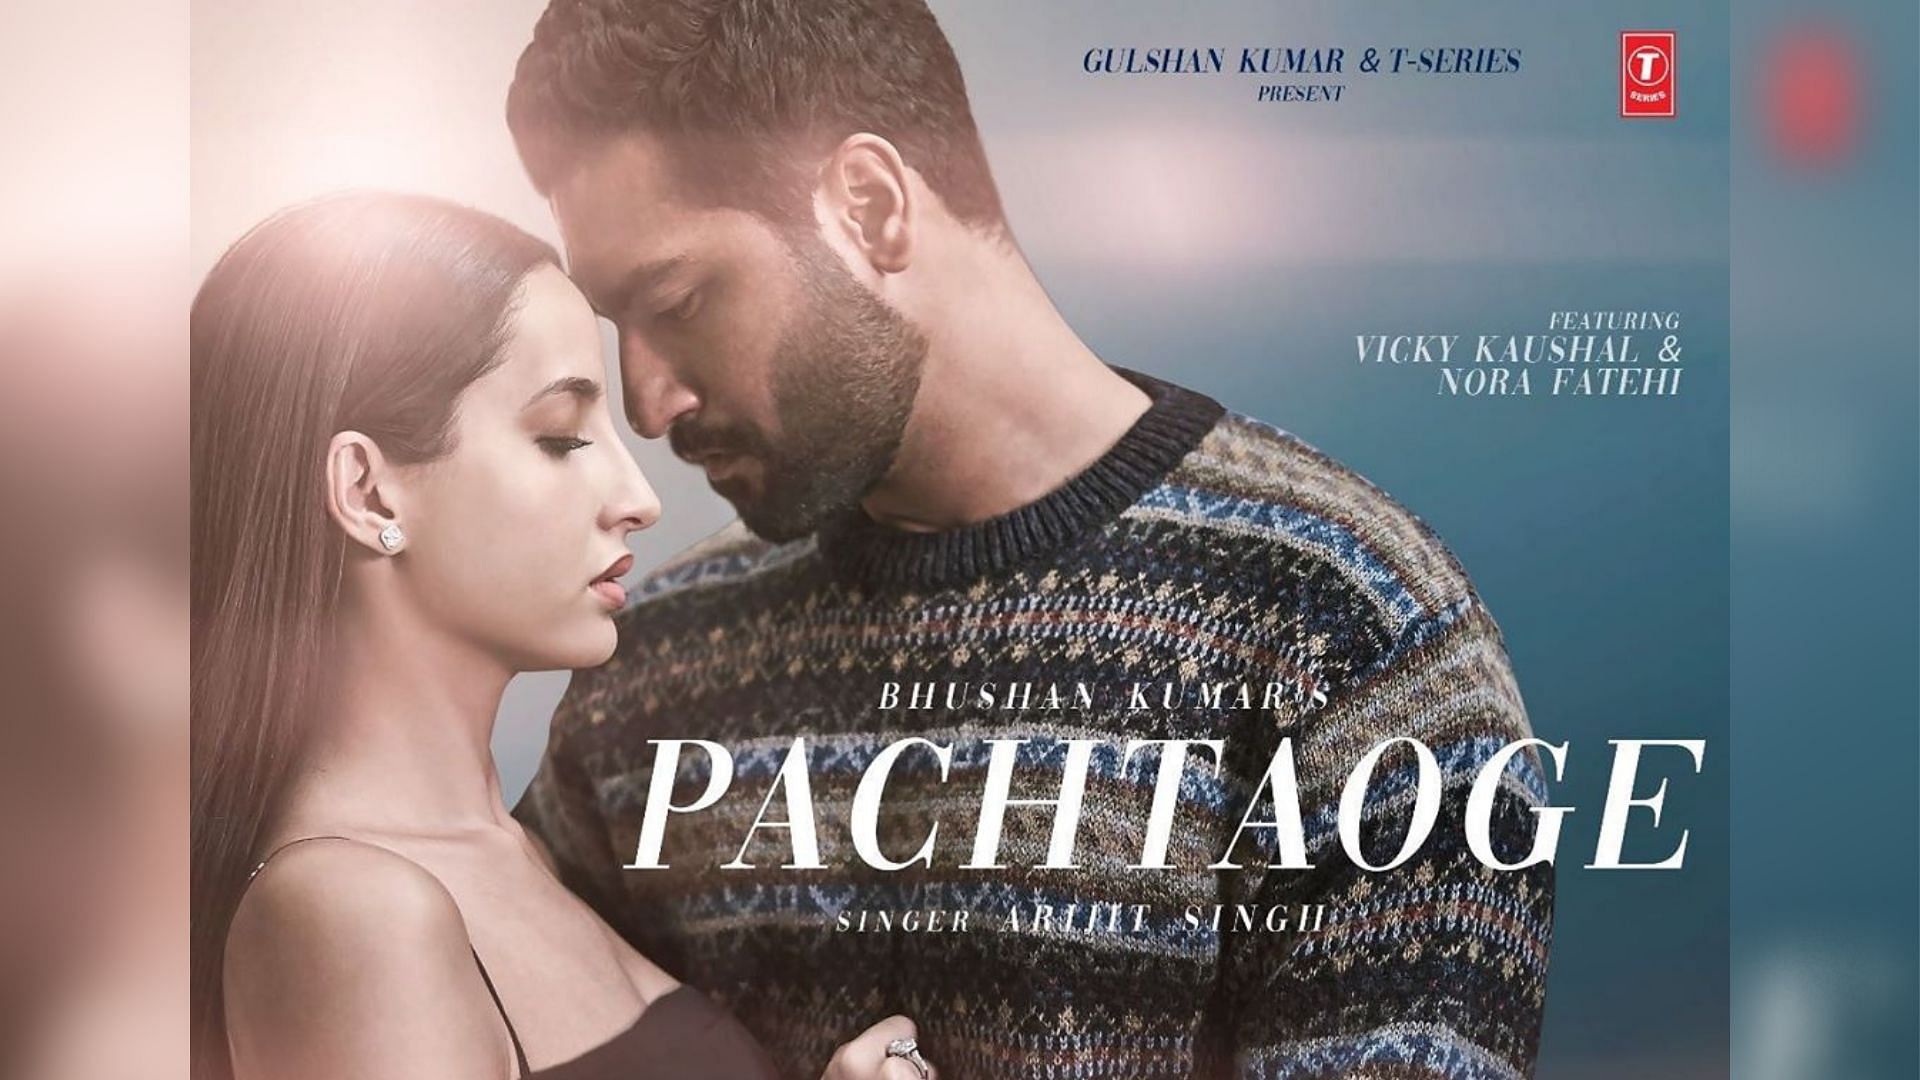 A poster for Vicky Kaushal and Nora Fatehi’s  music video for ‘Pachtaoge’ by Arijit Singh.